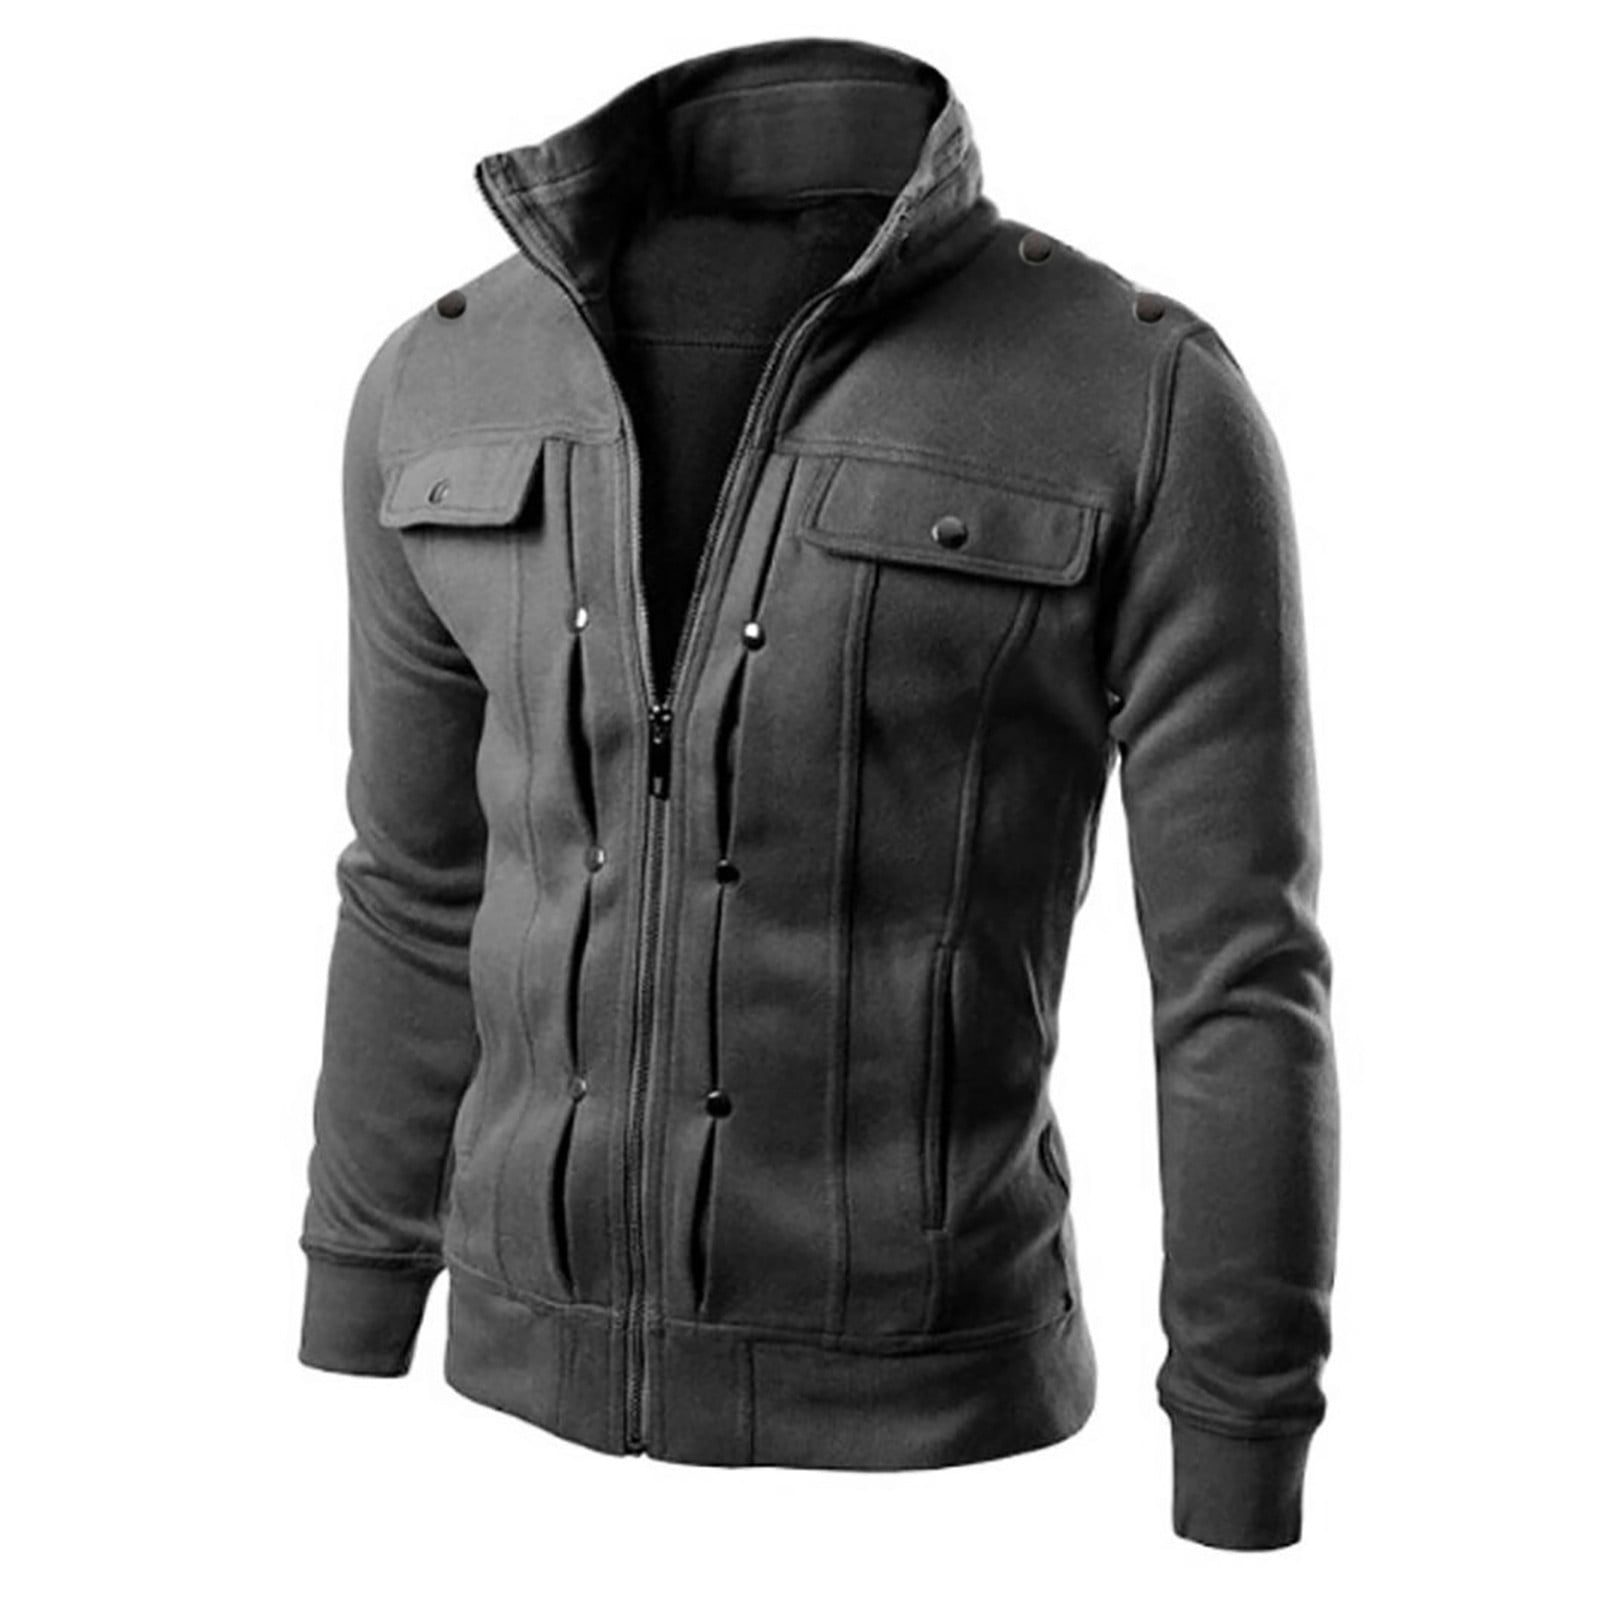 LEEy-world Mens Jackets Lightweight Men's Puffer Jacket Quilted Lined ...